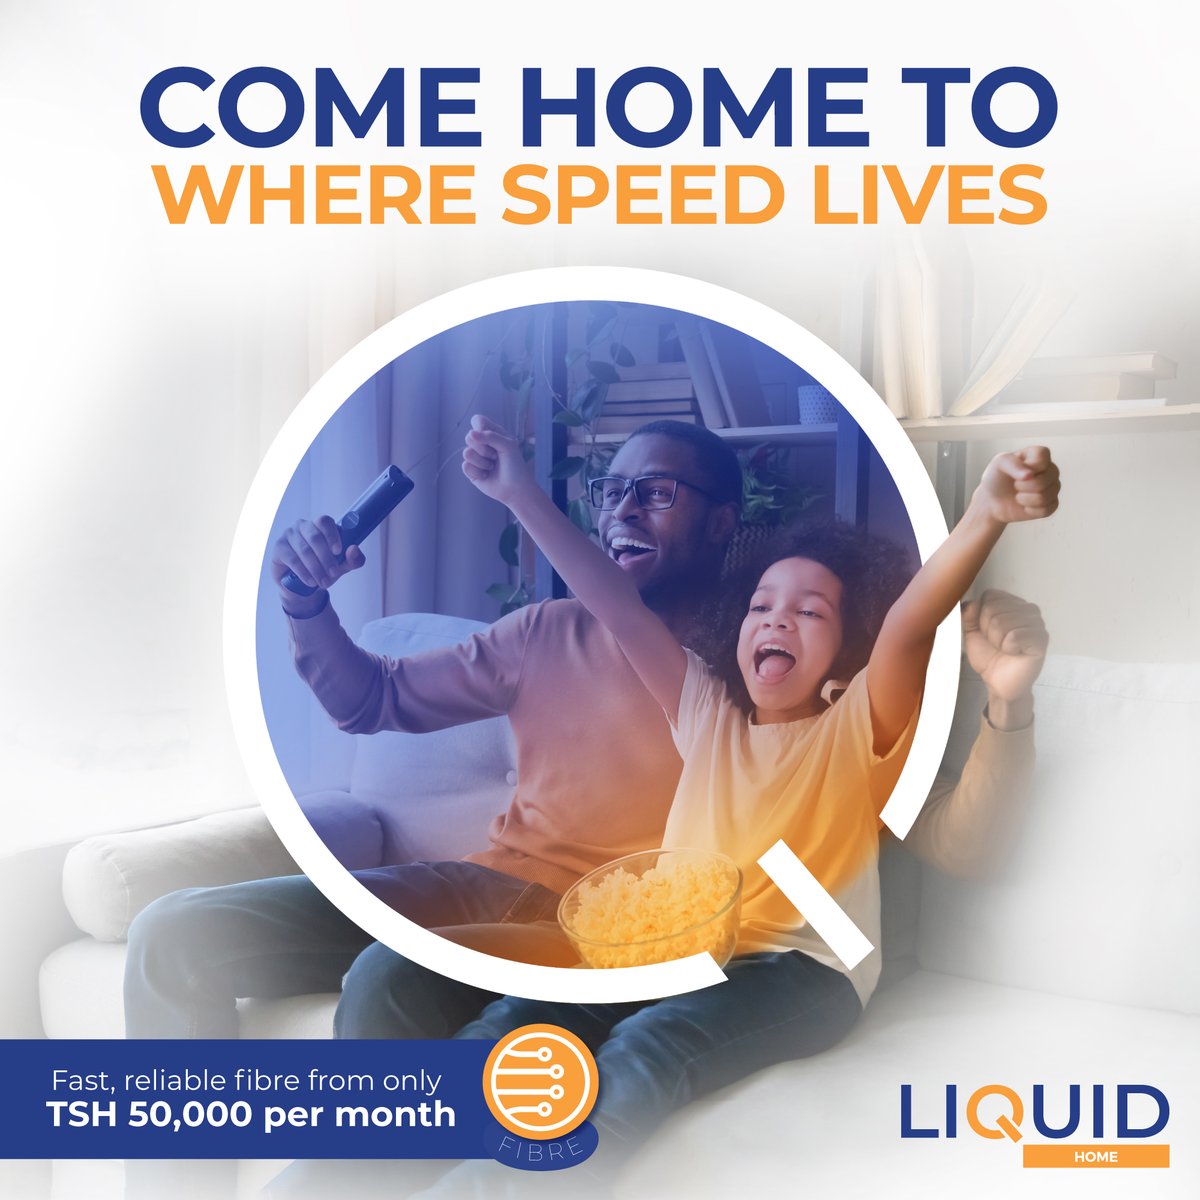 Liquid home gives you more speed and more reliability to do MORE at home.

To get your free and fast installation call Sheila through +255 748 111 000 or sales@liquidhome.co.tz

#LiquidHomeTZ  #WhereSpeedLives  
#WeAreLIT